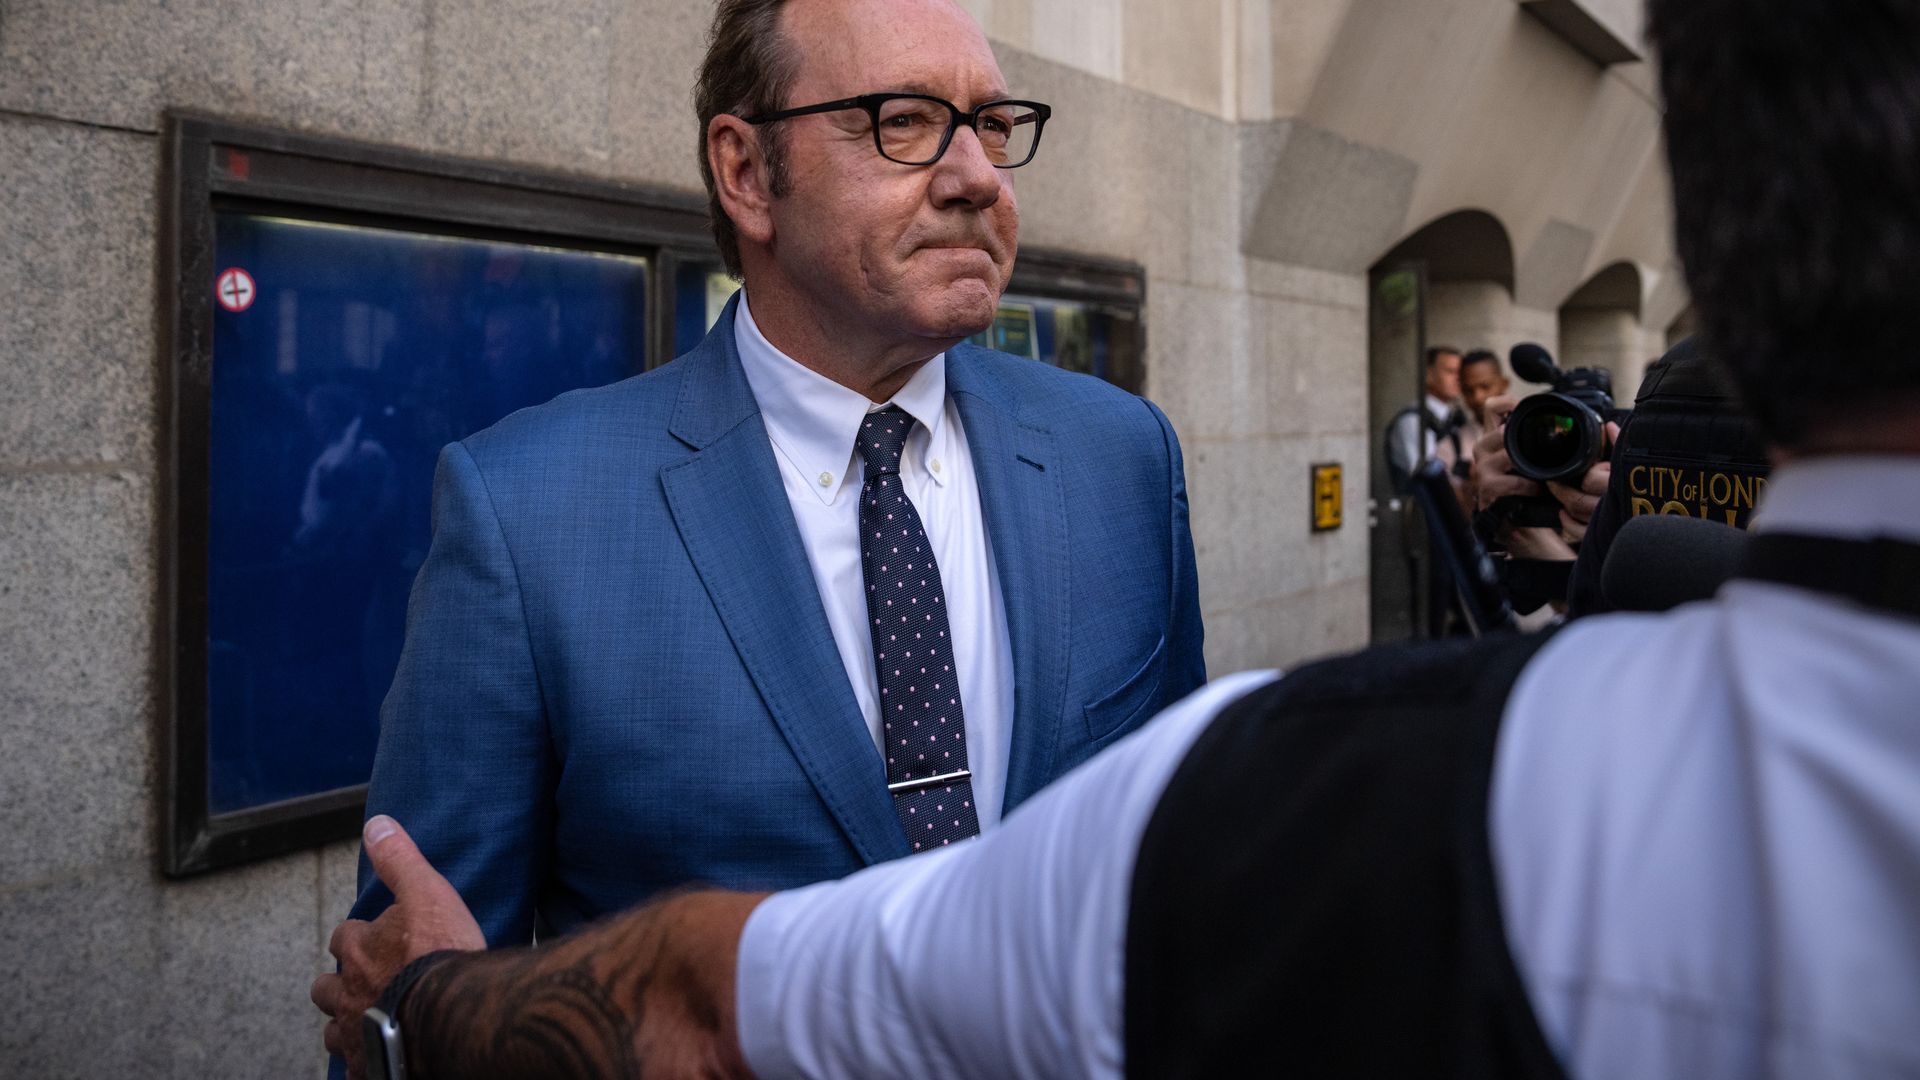 Actor Kevin Spacey leaves a court room.